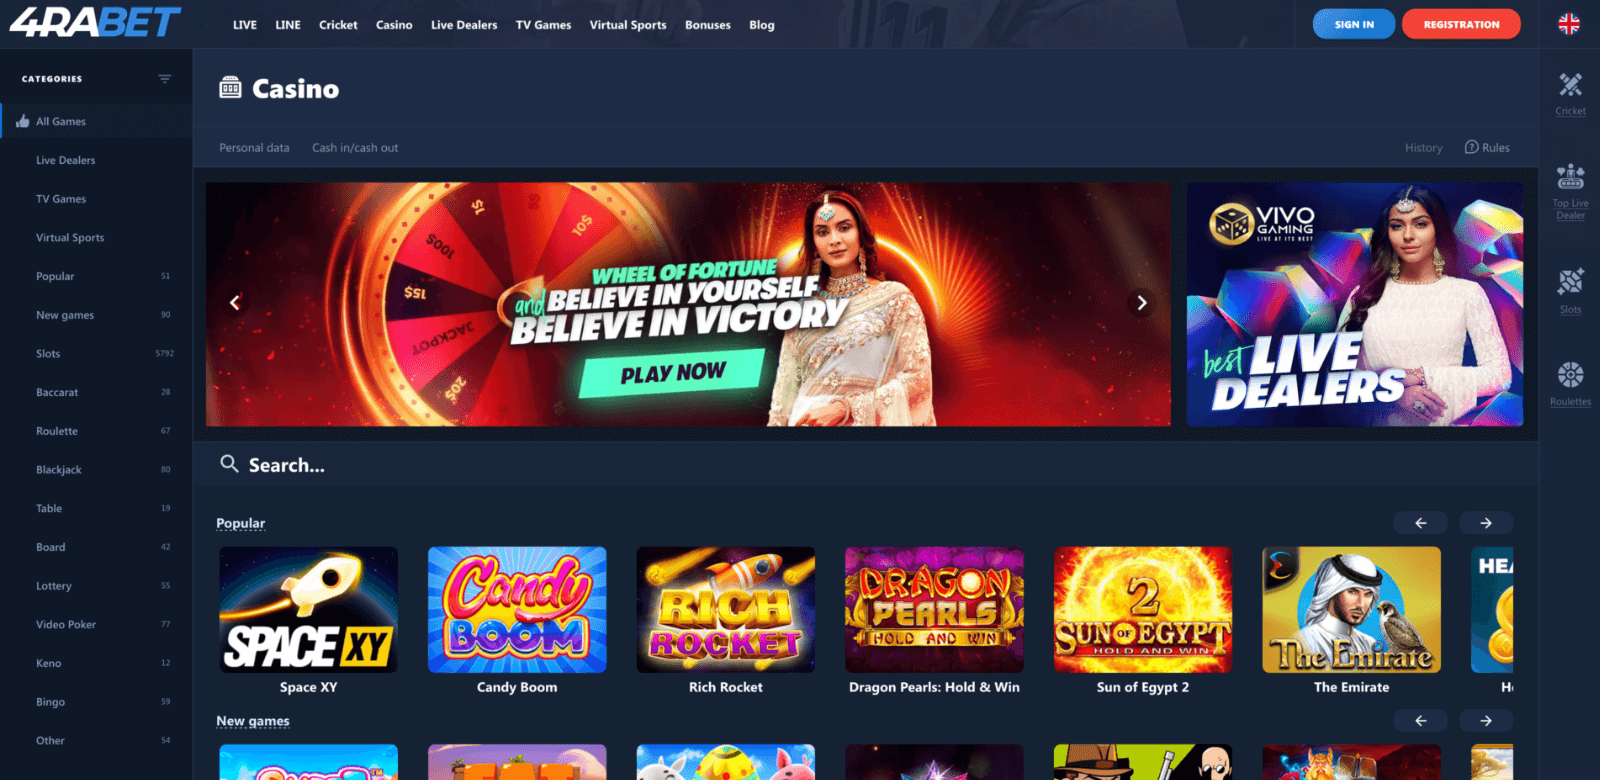 main page of the casino section of 4rabet